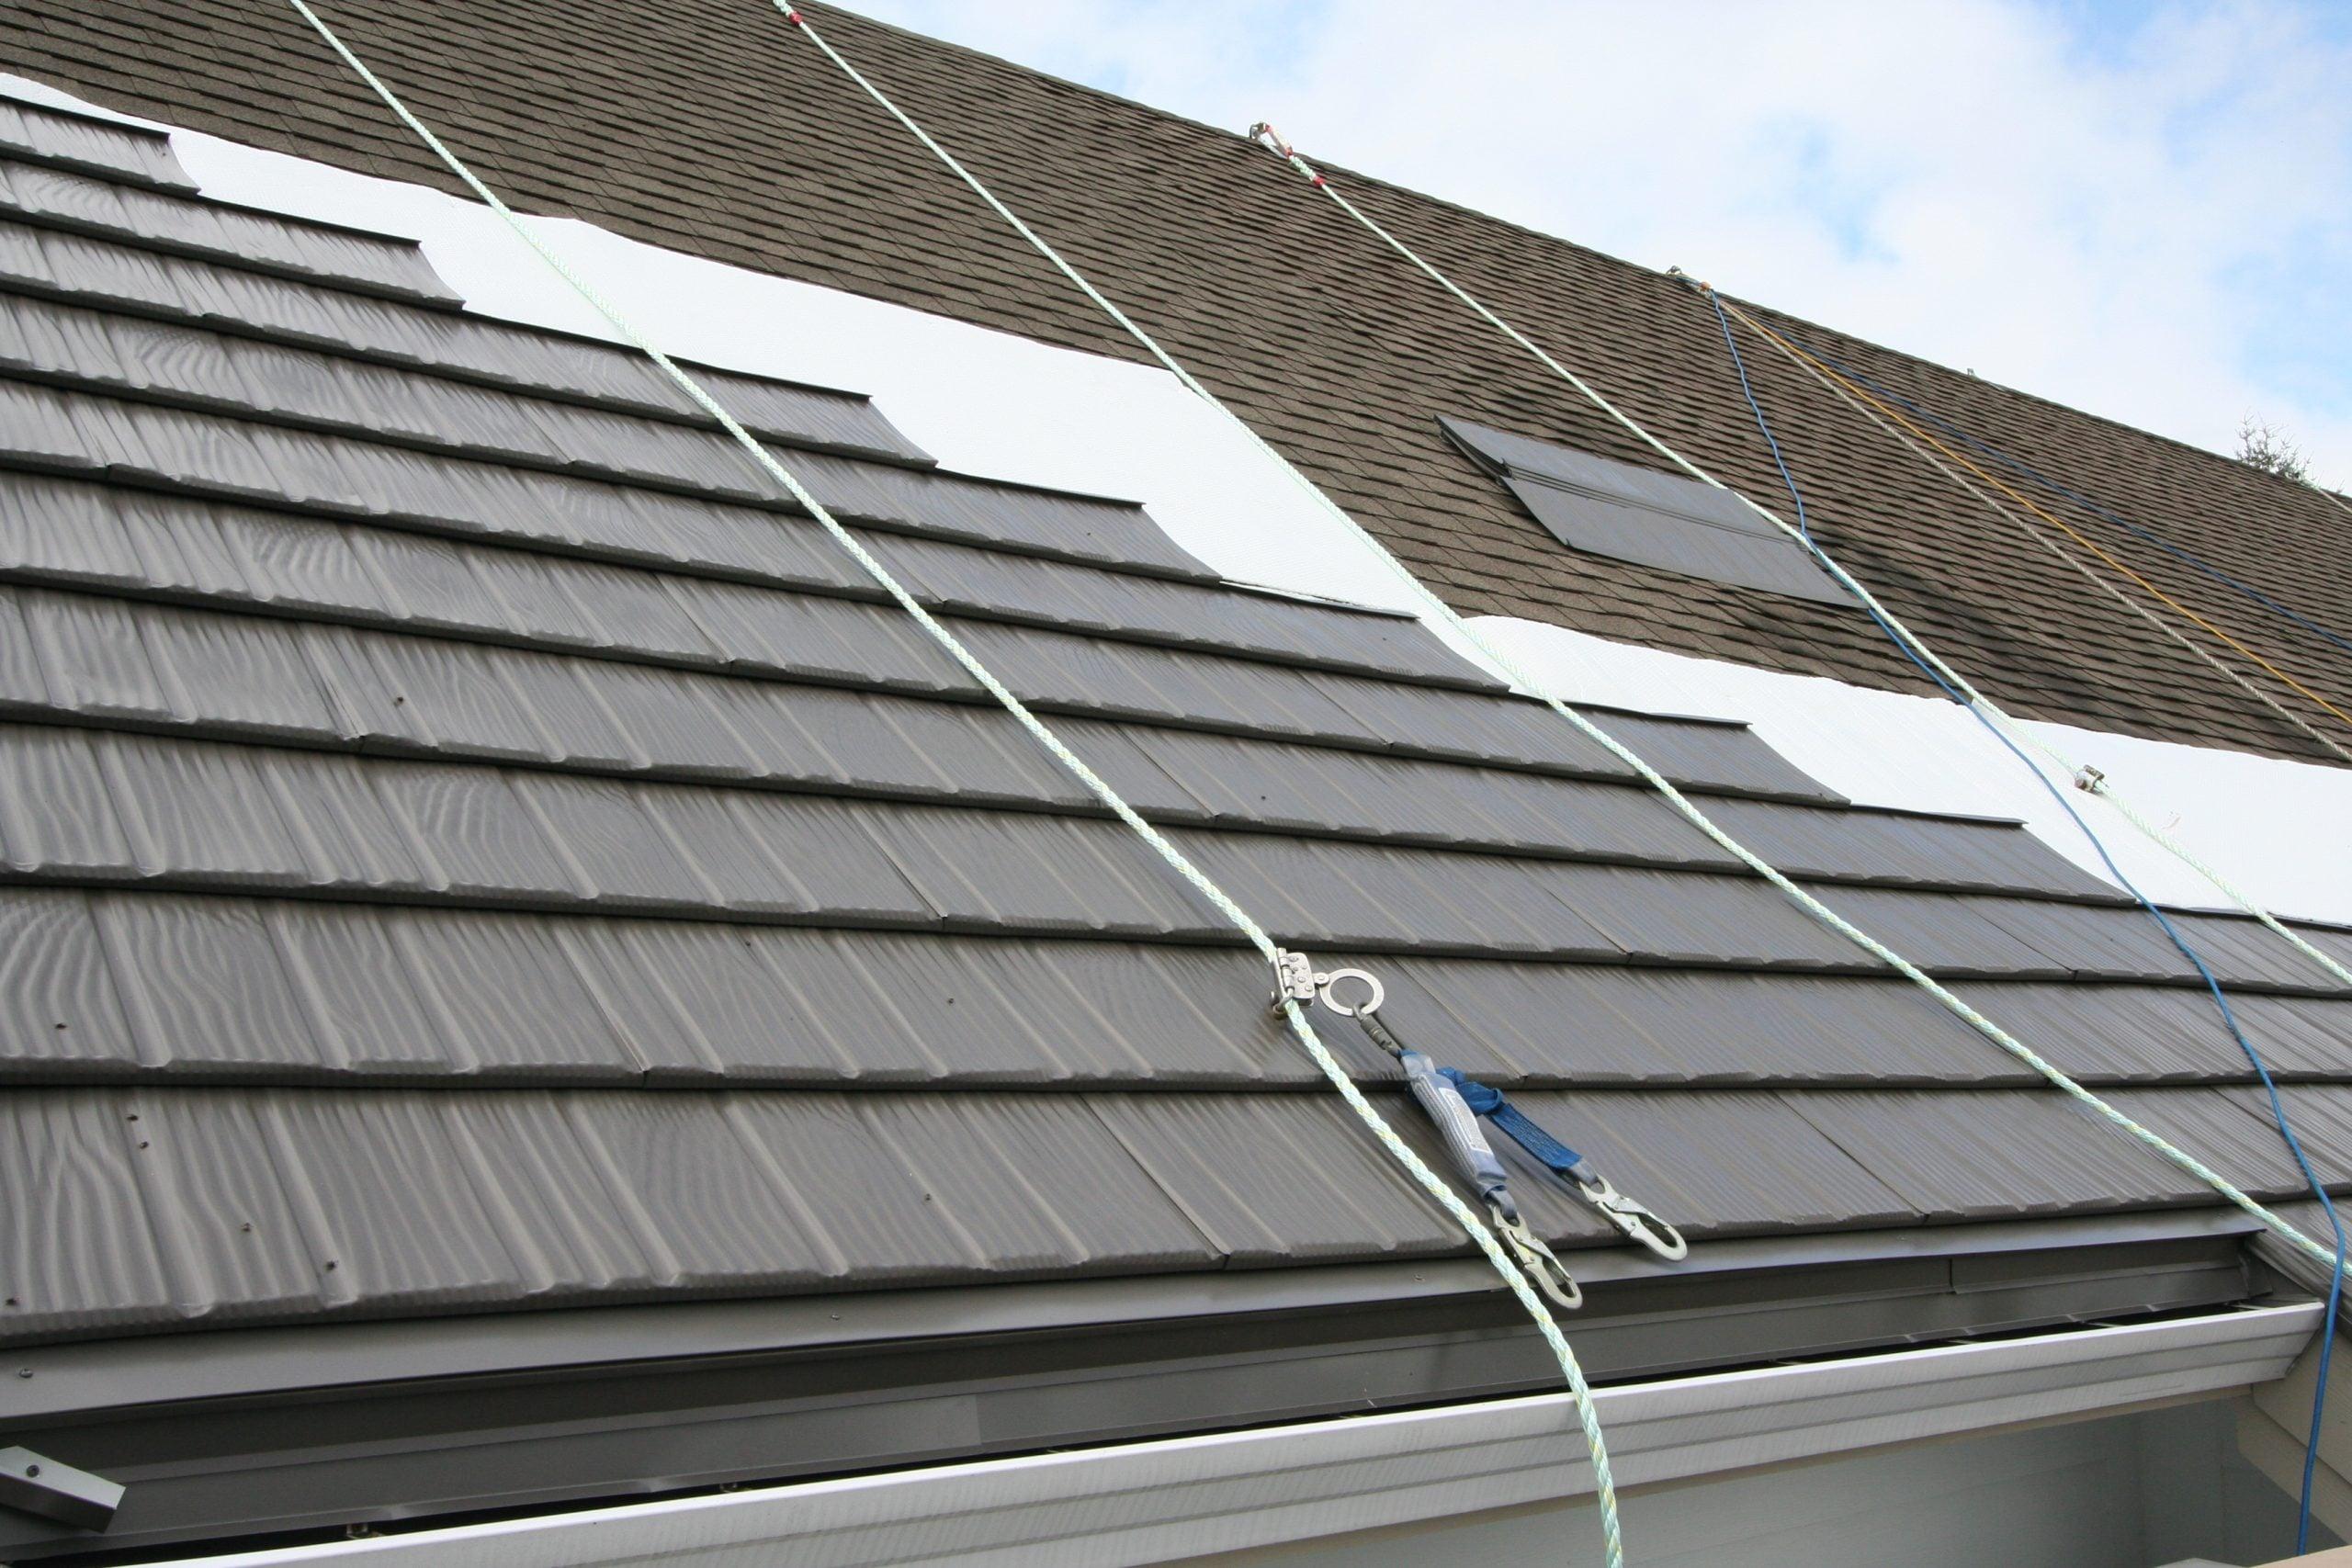 Putting a Metal Roof on Top of Shingles: Is It a Good Idea?